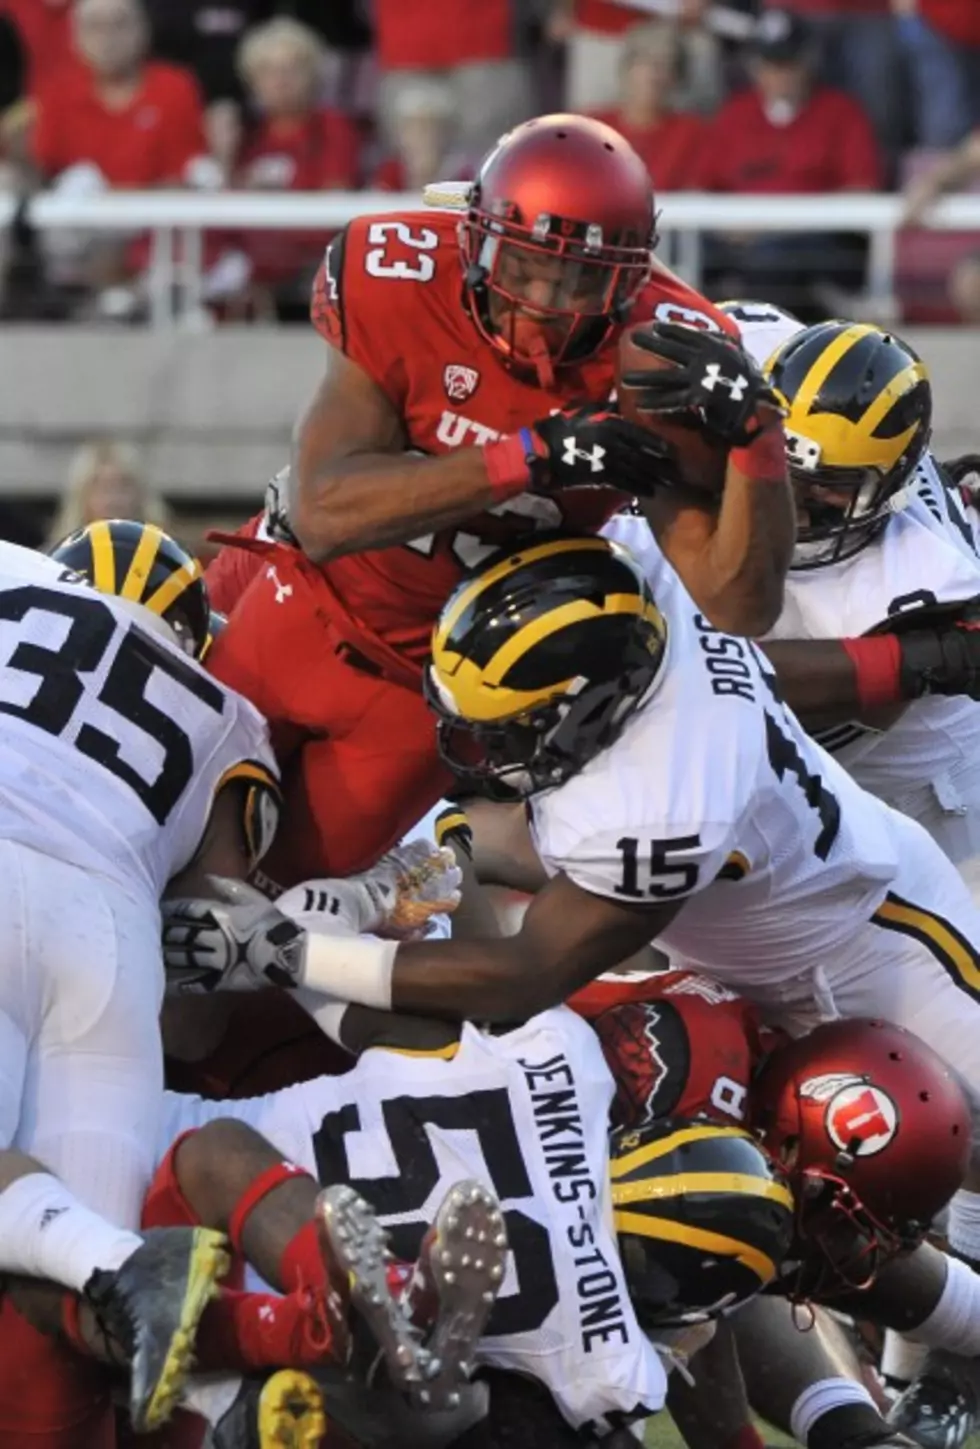 Wolverines Open Harbaugh Era With Loss